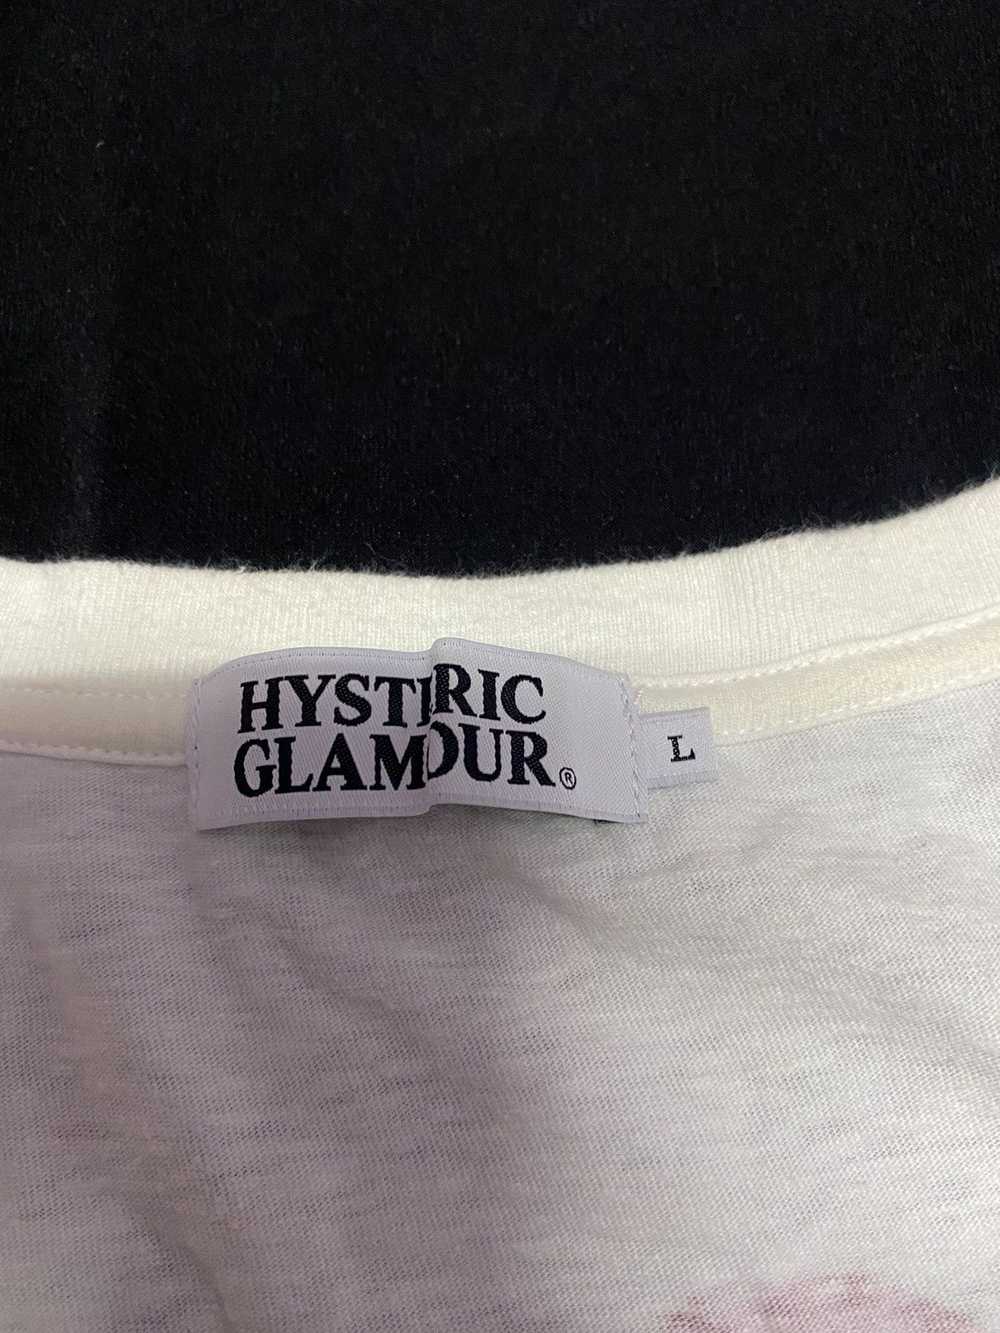 Hysteric Glamour Iconic pinup girl LS - image 6